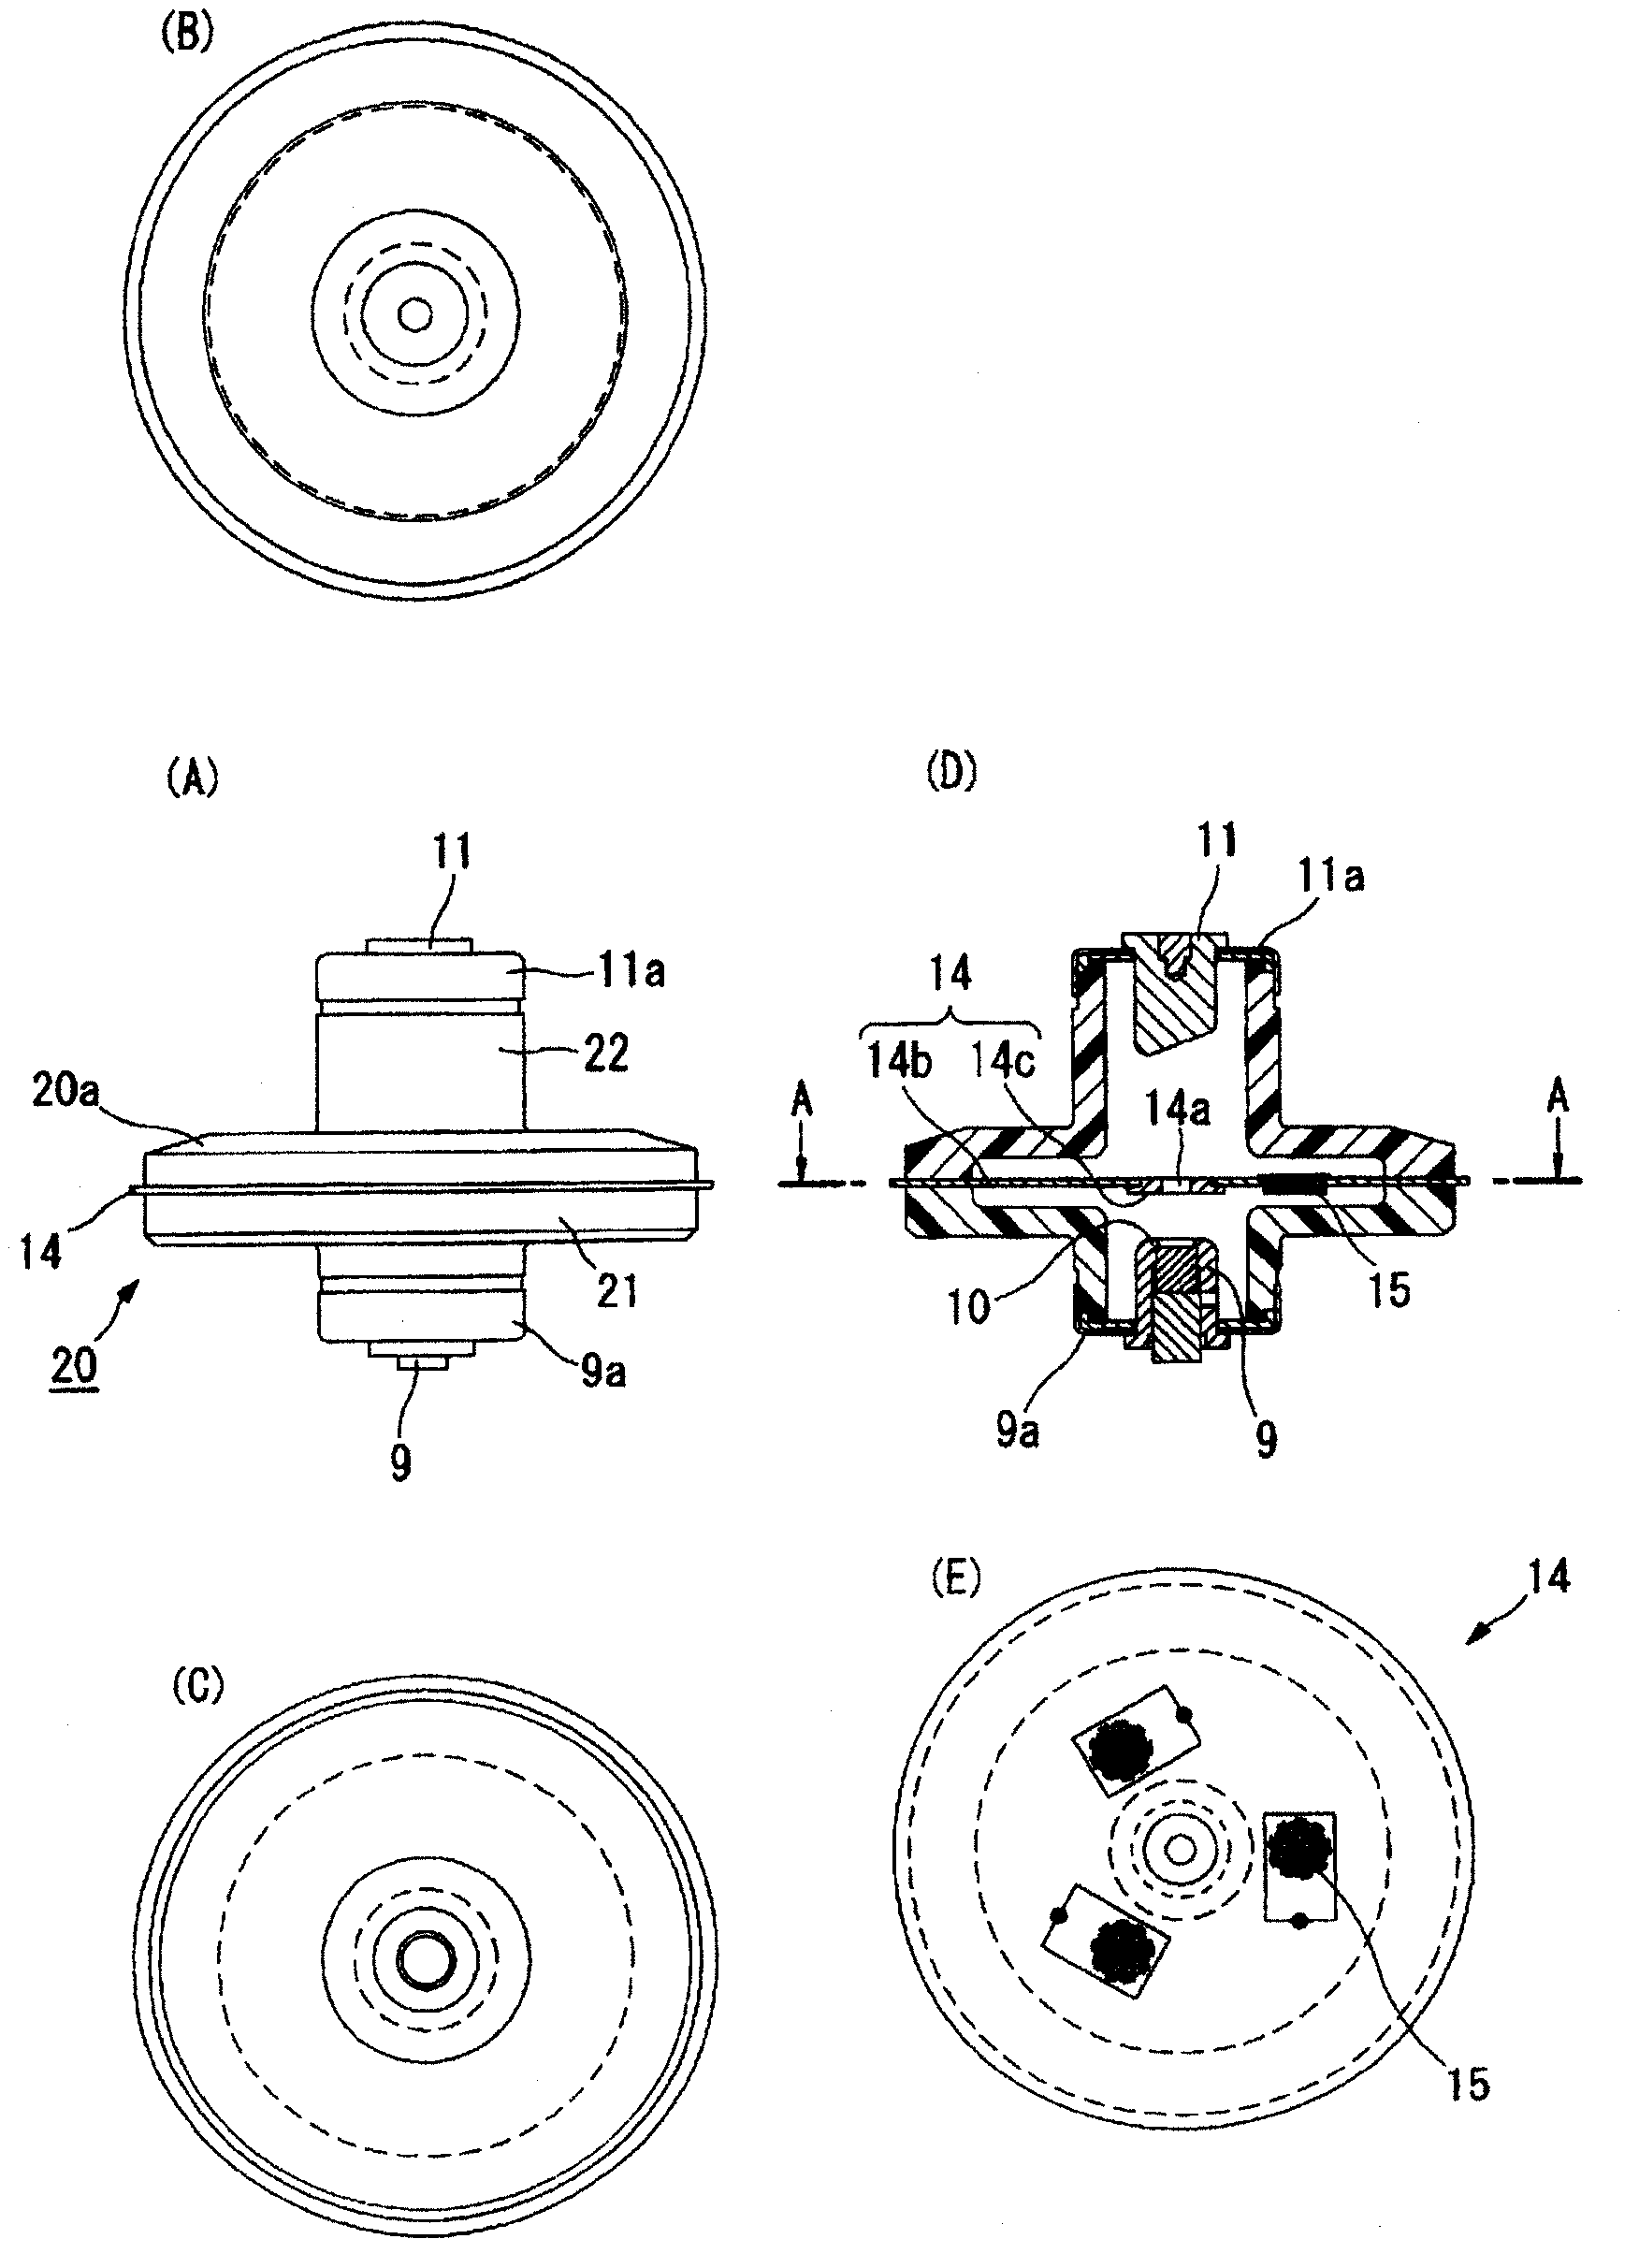 Field emission apparatus and hand-held nondestructive inspection apparatus